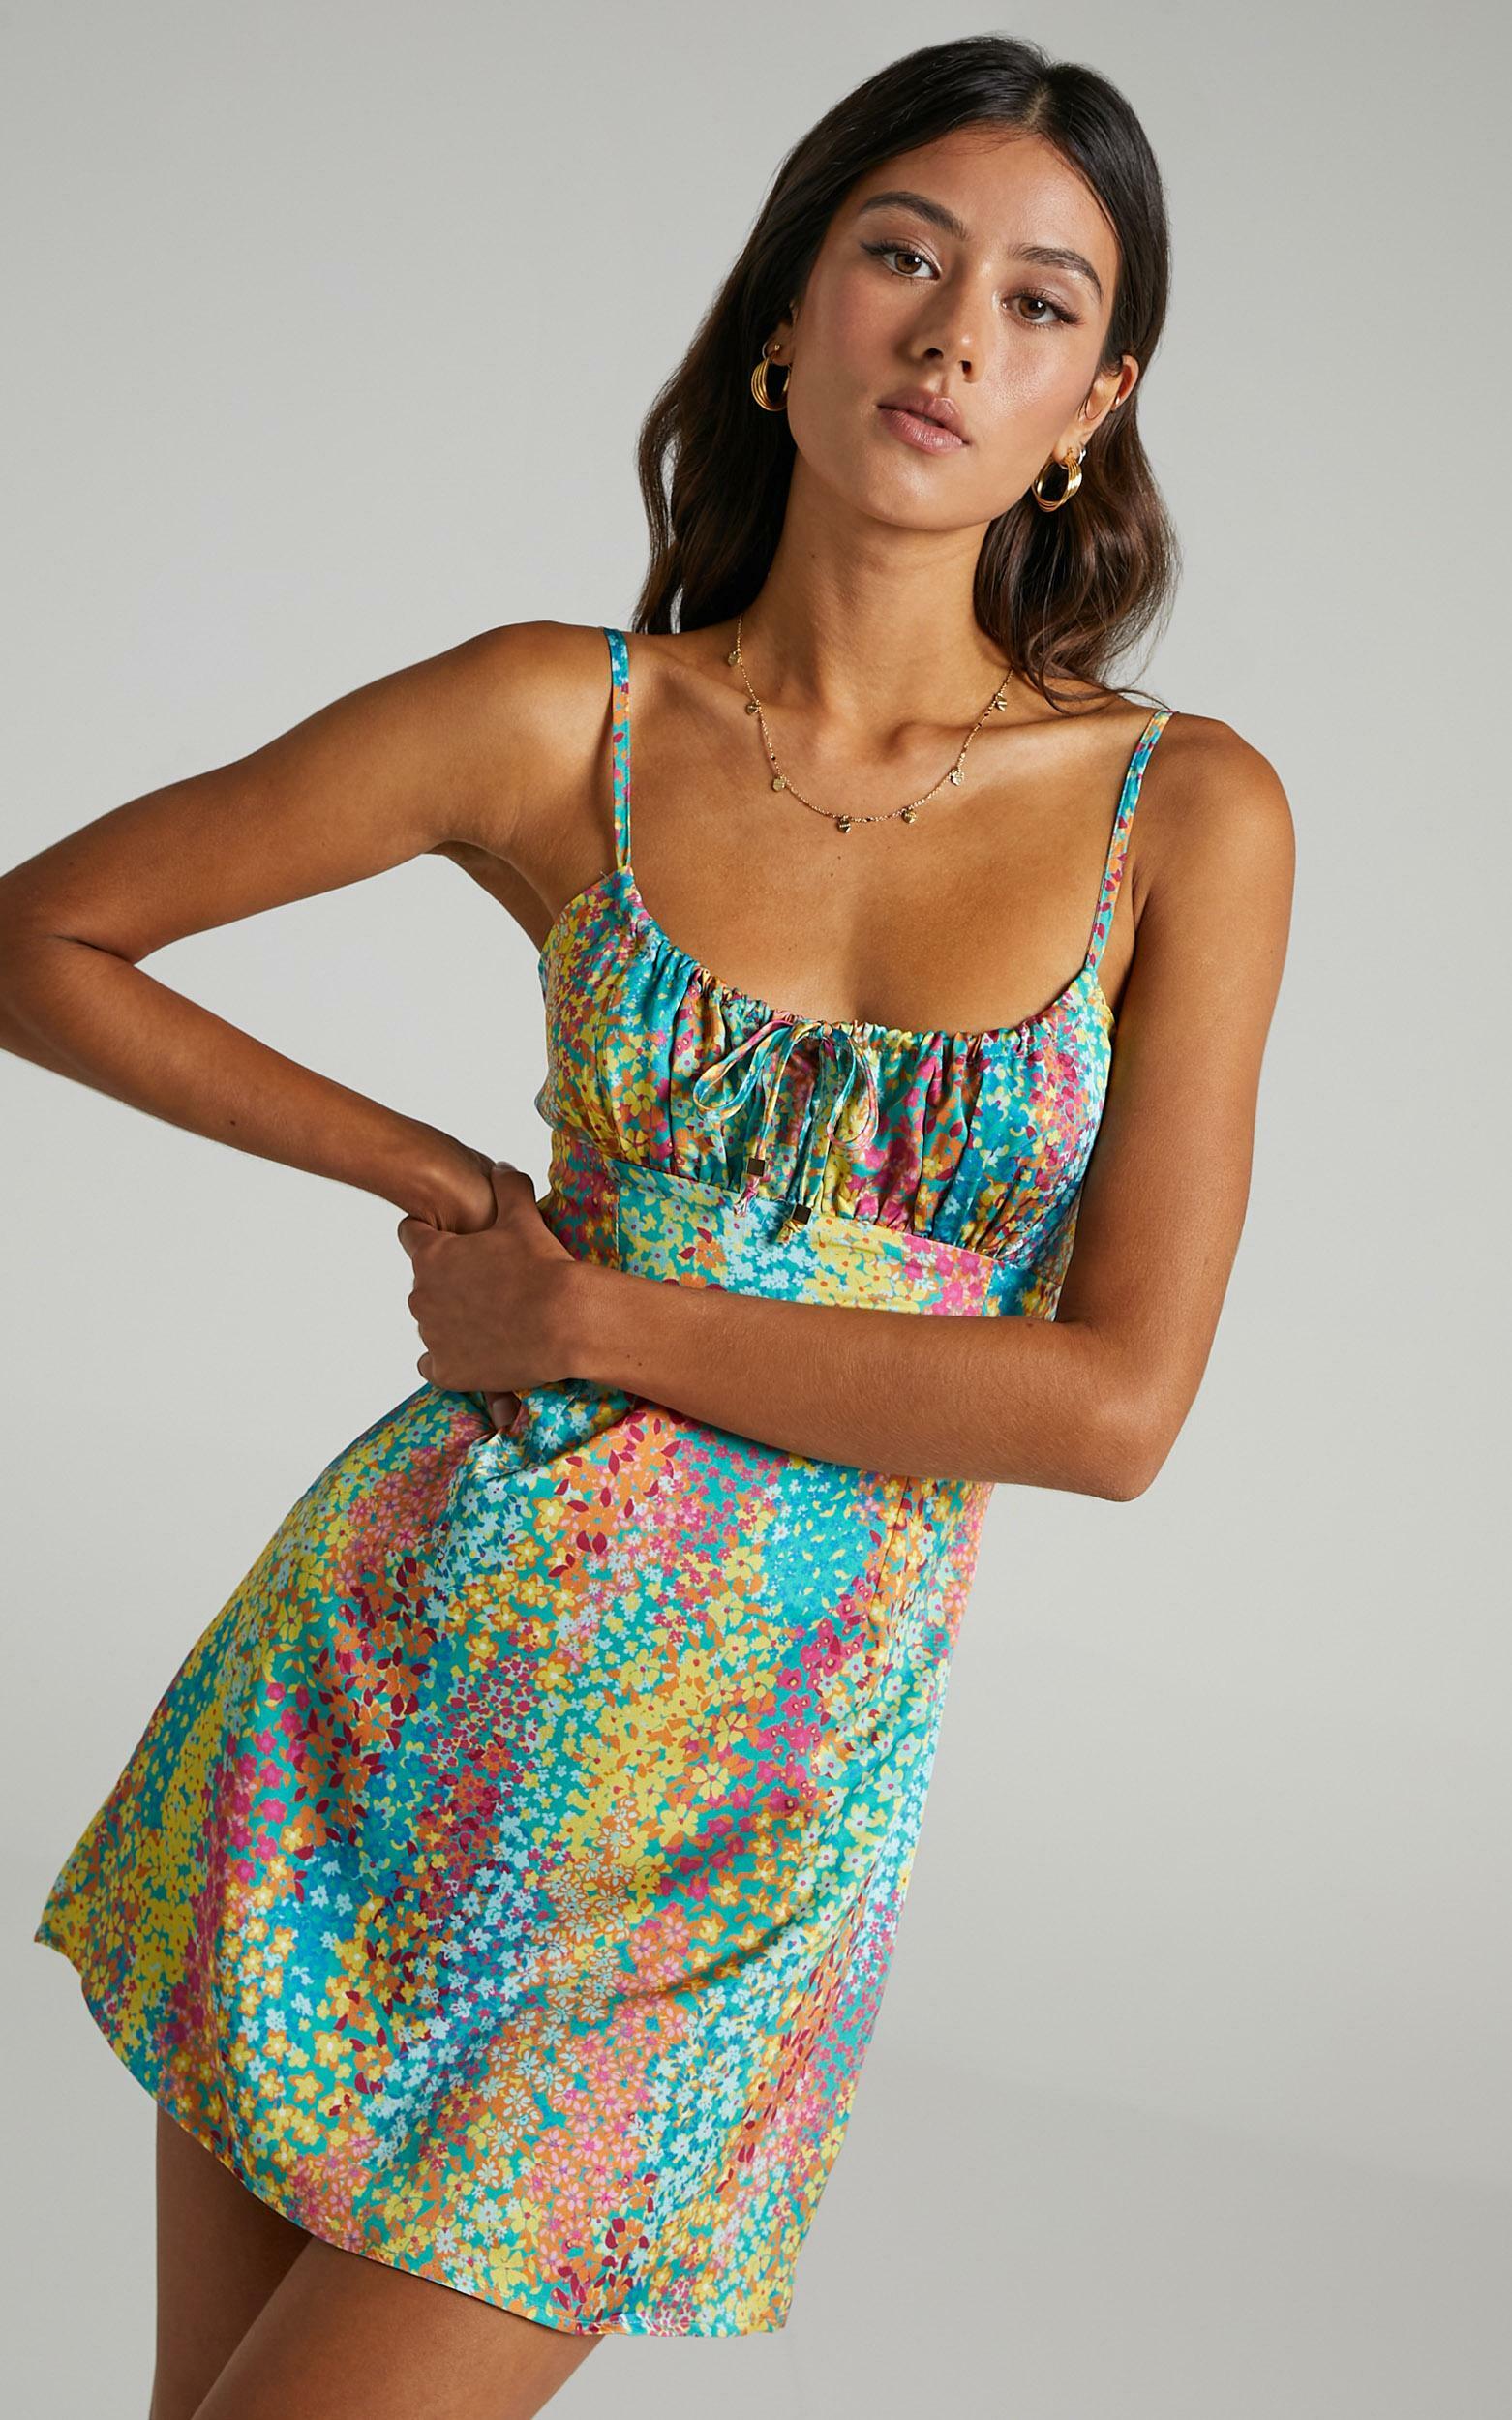 Ive Got You Now Dress in Rainbow Floral - 04, MLT5, hi-res image number null